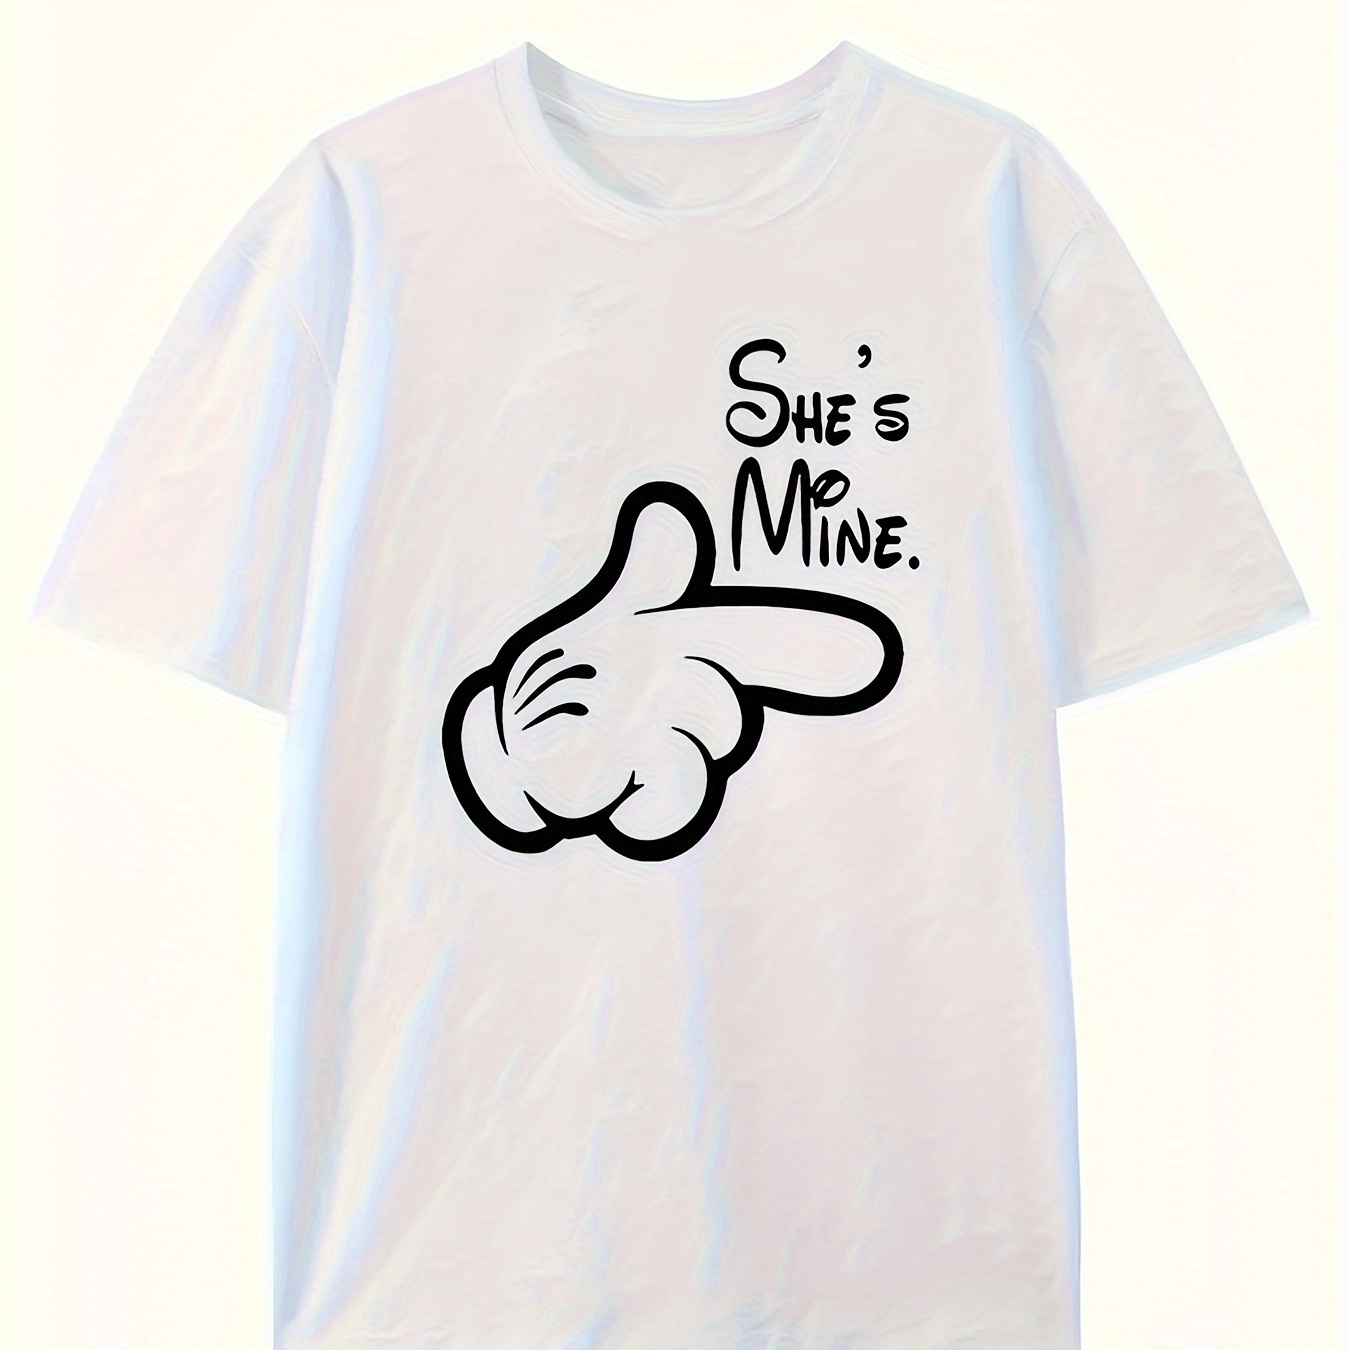 

Couple Front Print Pure Cotton T-shirt "he's/she's Mine" Graphic Tee Summer Casual Tee Streetwear Top For Men Women